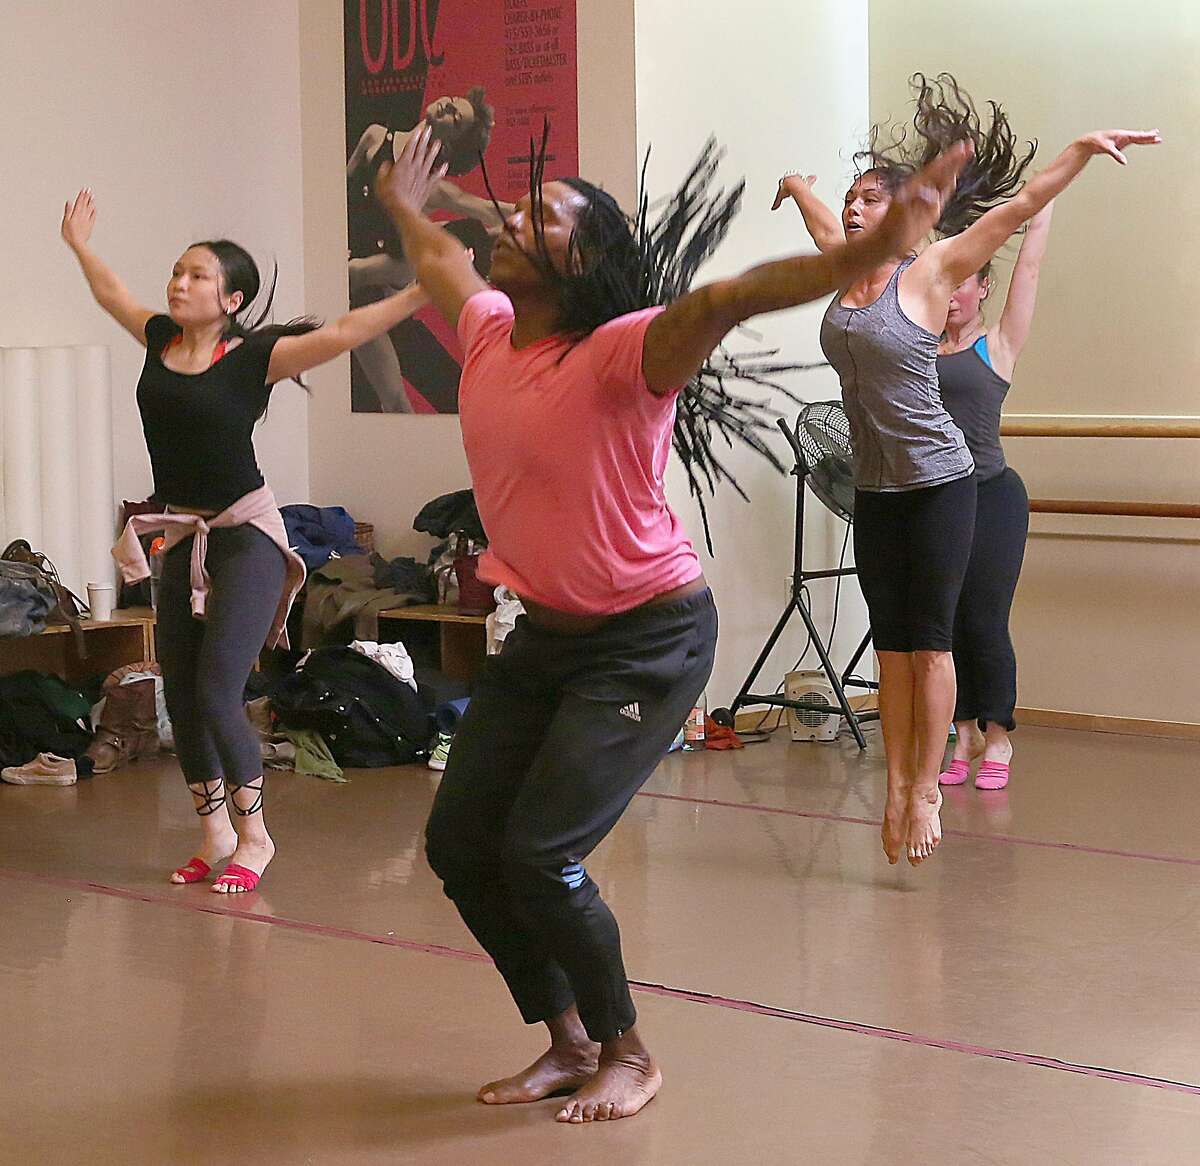 Ramon Ramos Alayo (front) teaches the Afro-Cuban modern dance class on Friday, March 10, 2017, in San Francisco, Calif. Alayo is the artistic director and co-founder of CubaCaribe, a dance organization which represents and spotlights the Bay Area's Cuban and Caribbean artists, dancers and community.